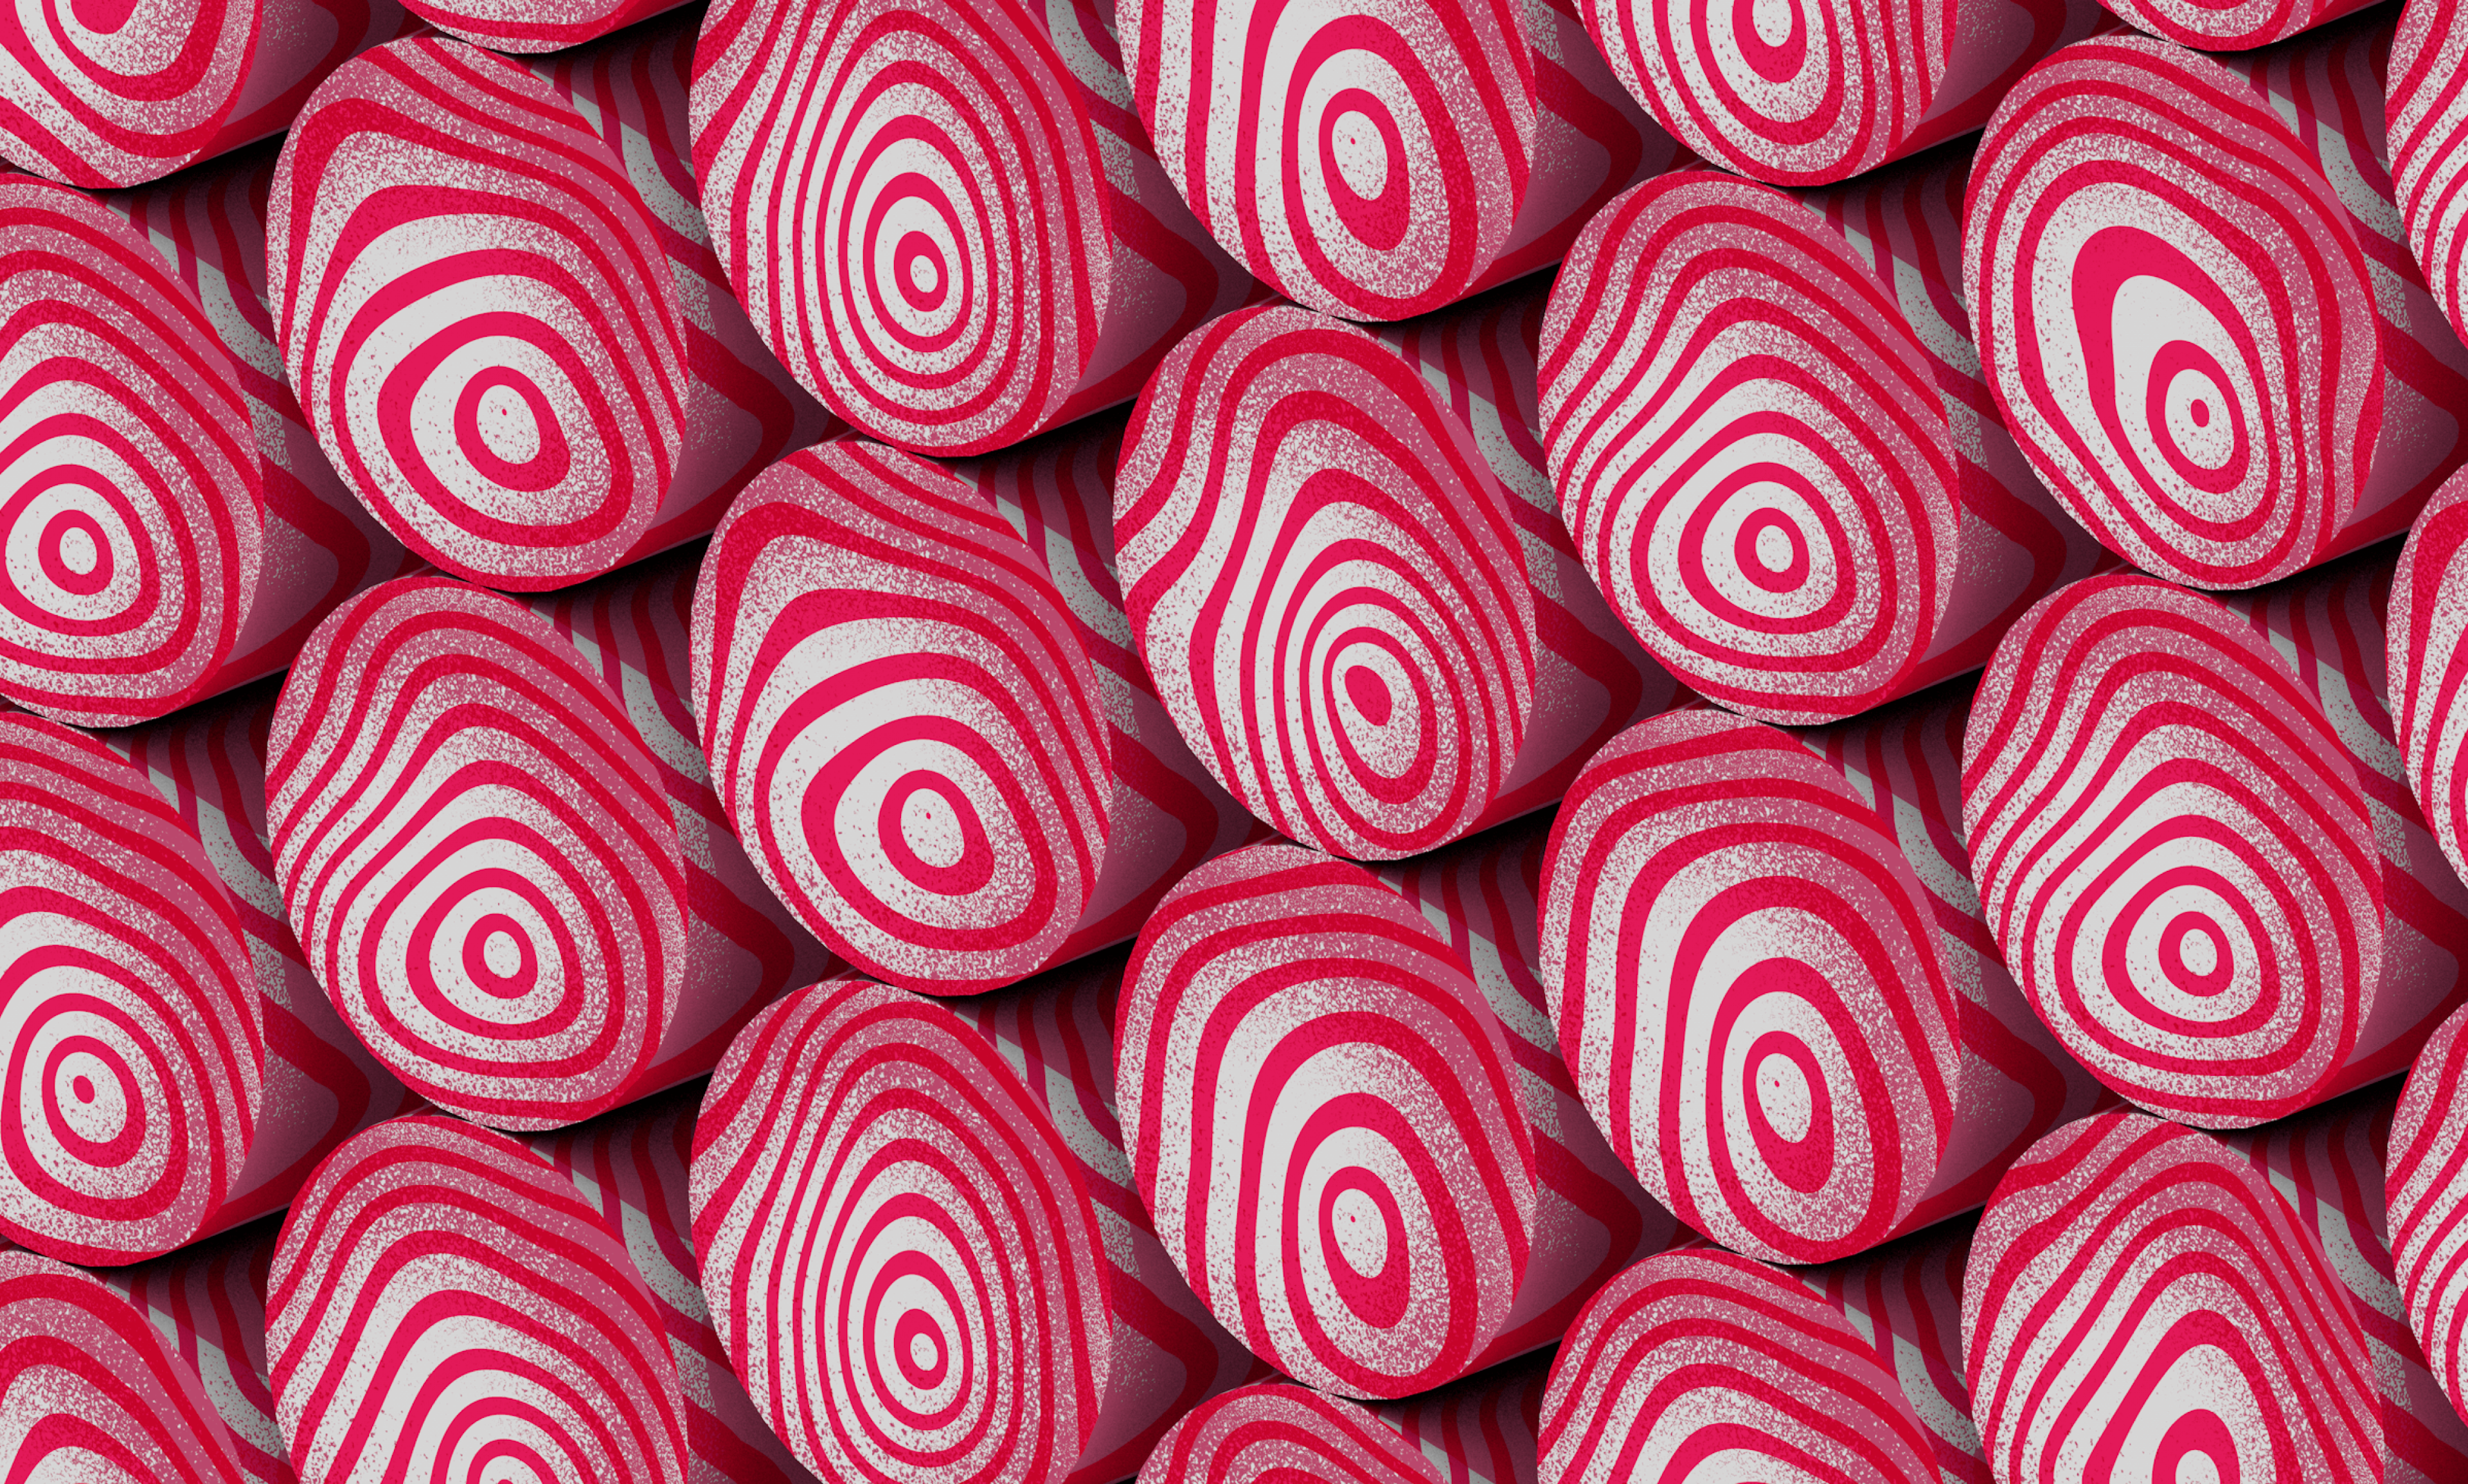 red and pink thumbprints in angled rows